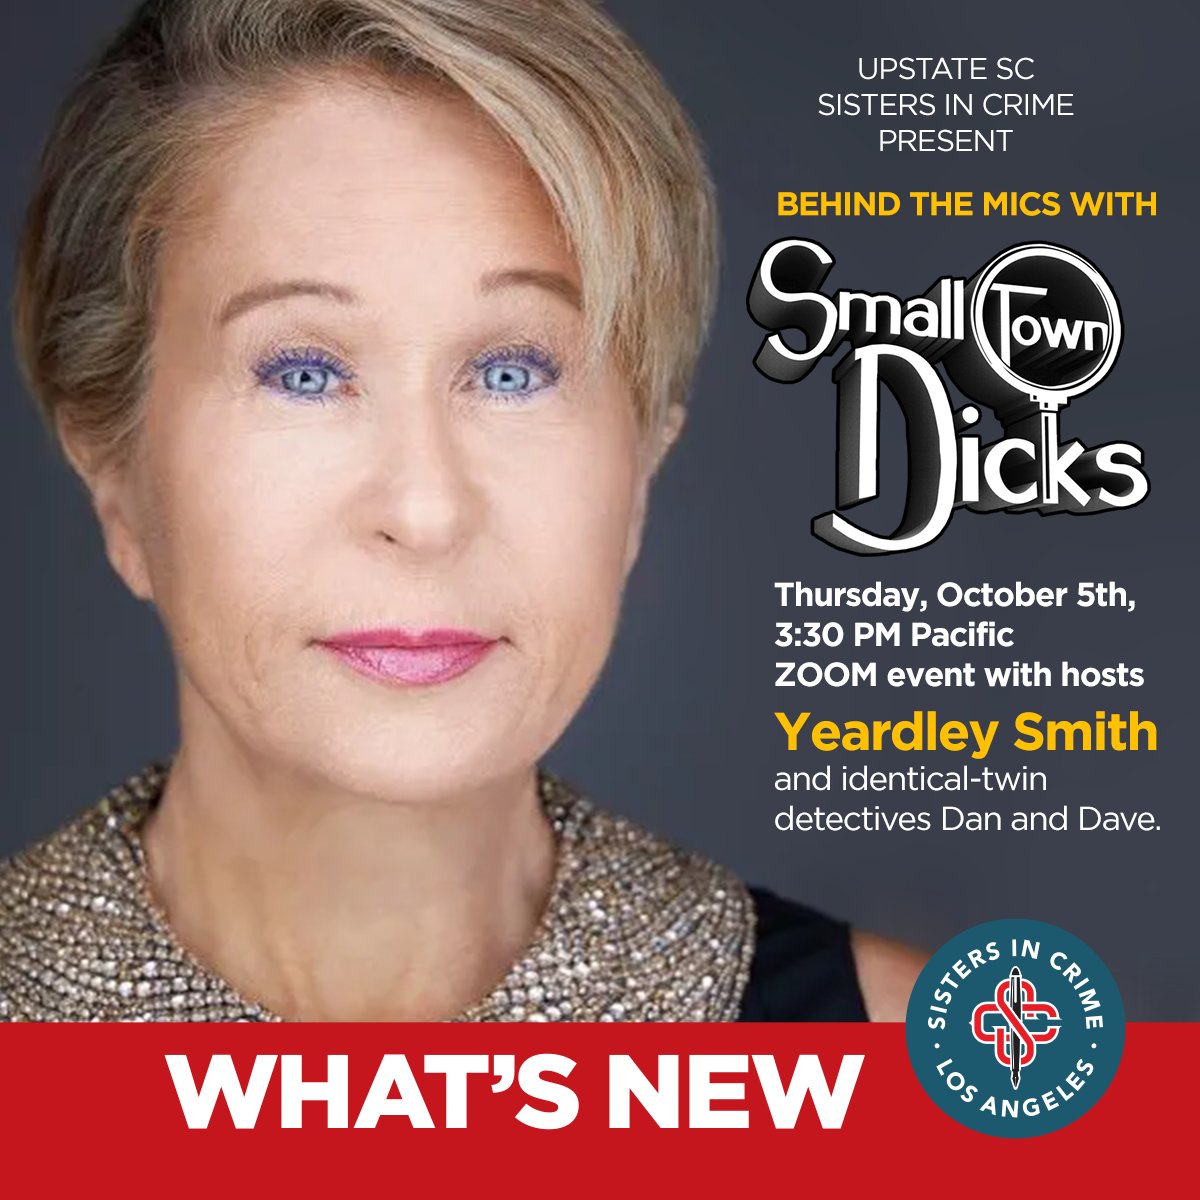 What does it take to research and produce a true crime podcast? Join Behind the Mics with Small Town Dicks – With Yeardley Smith and twin detectives Dan and Dave - a ZOOM event. Pre-registration required Check out sistersincrimeupstatesc.com/news/ for details.